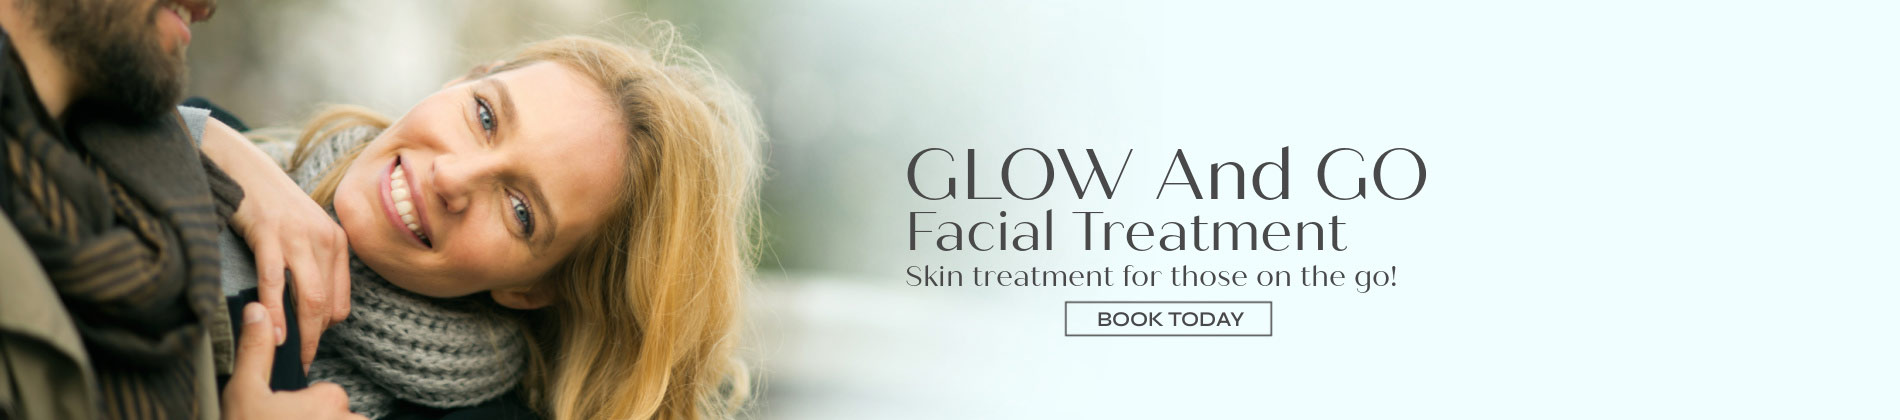 Glow And Go Facial Treatment